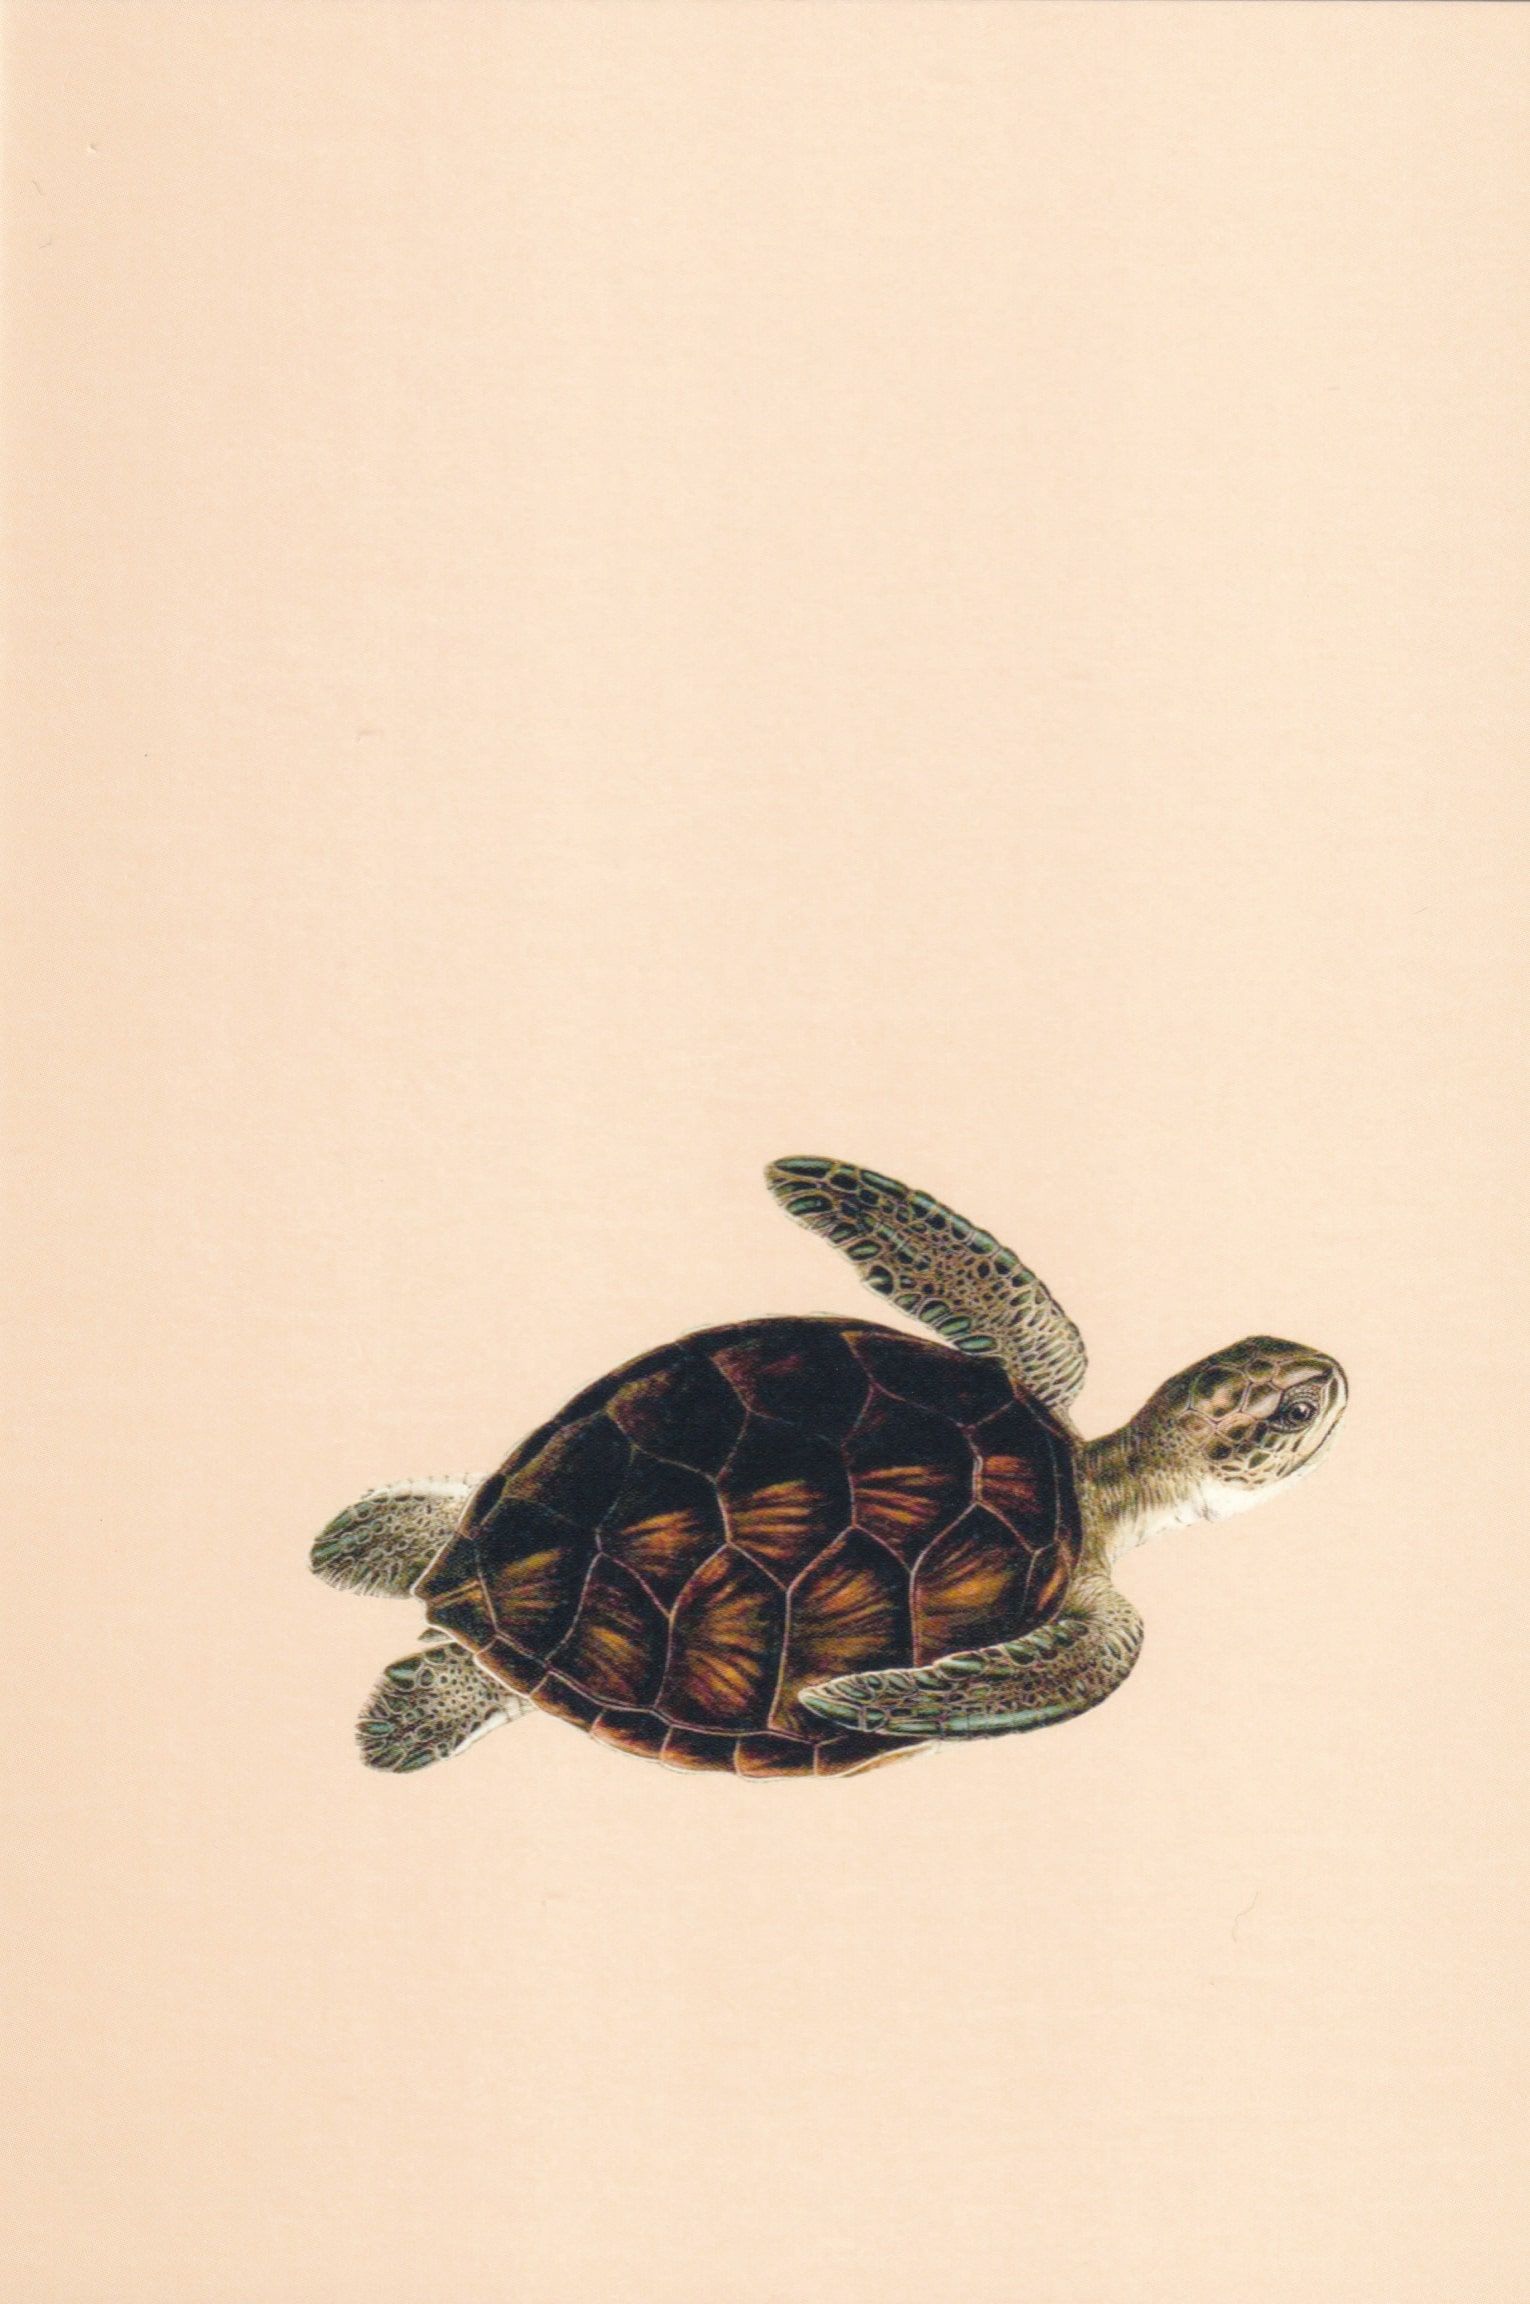 A turtle is swimming in the water - Sea turtle